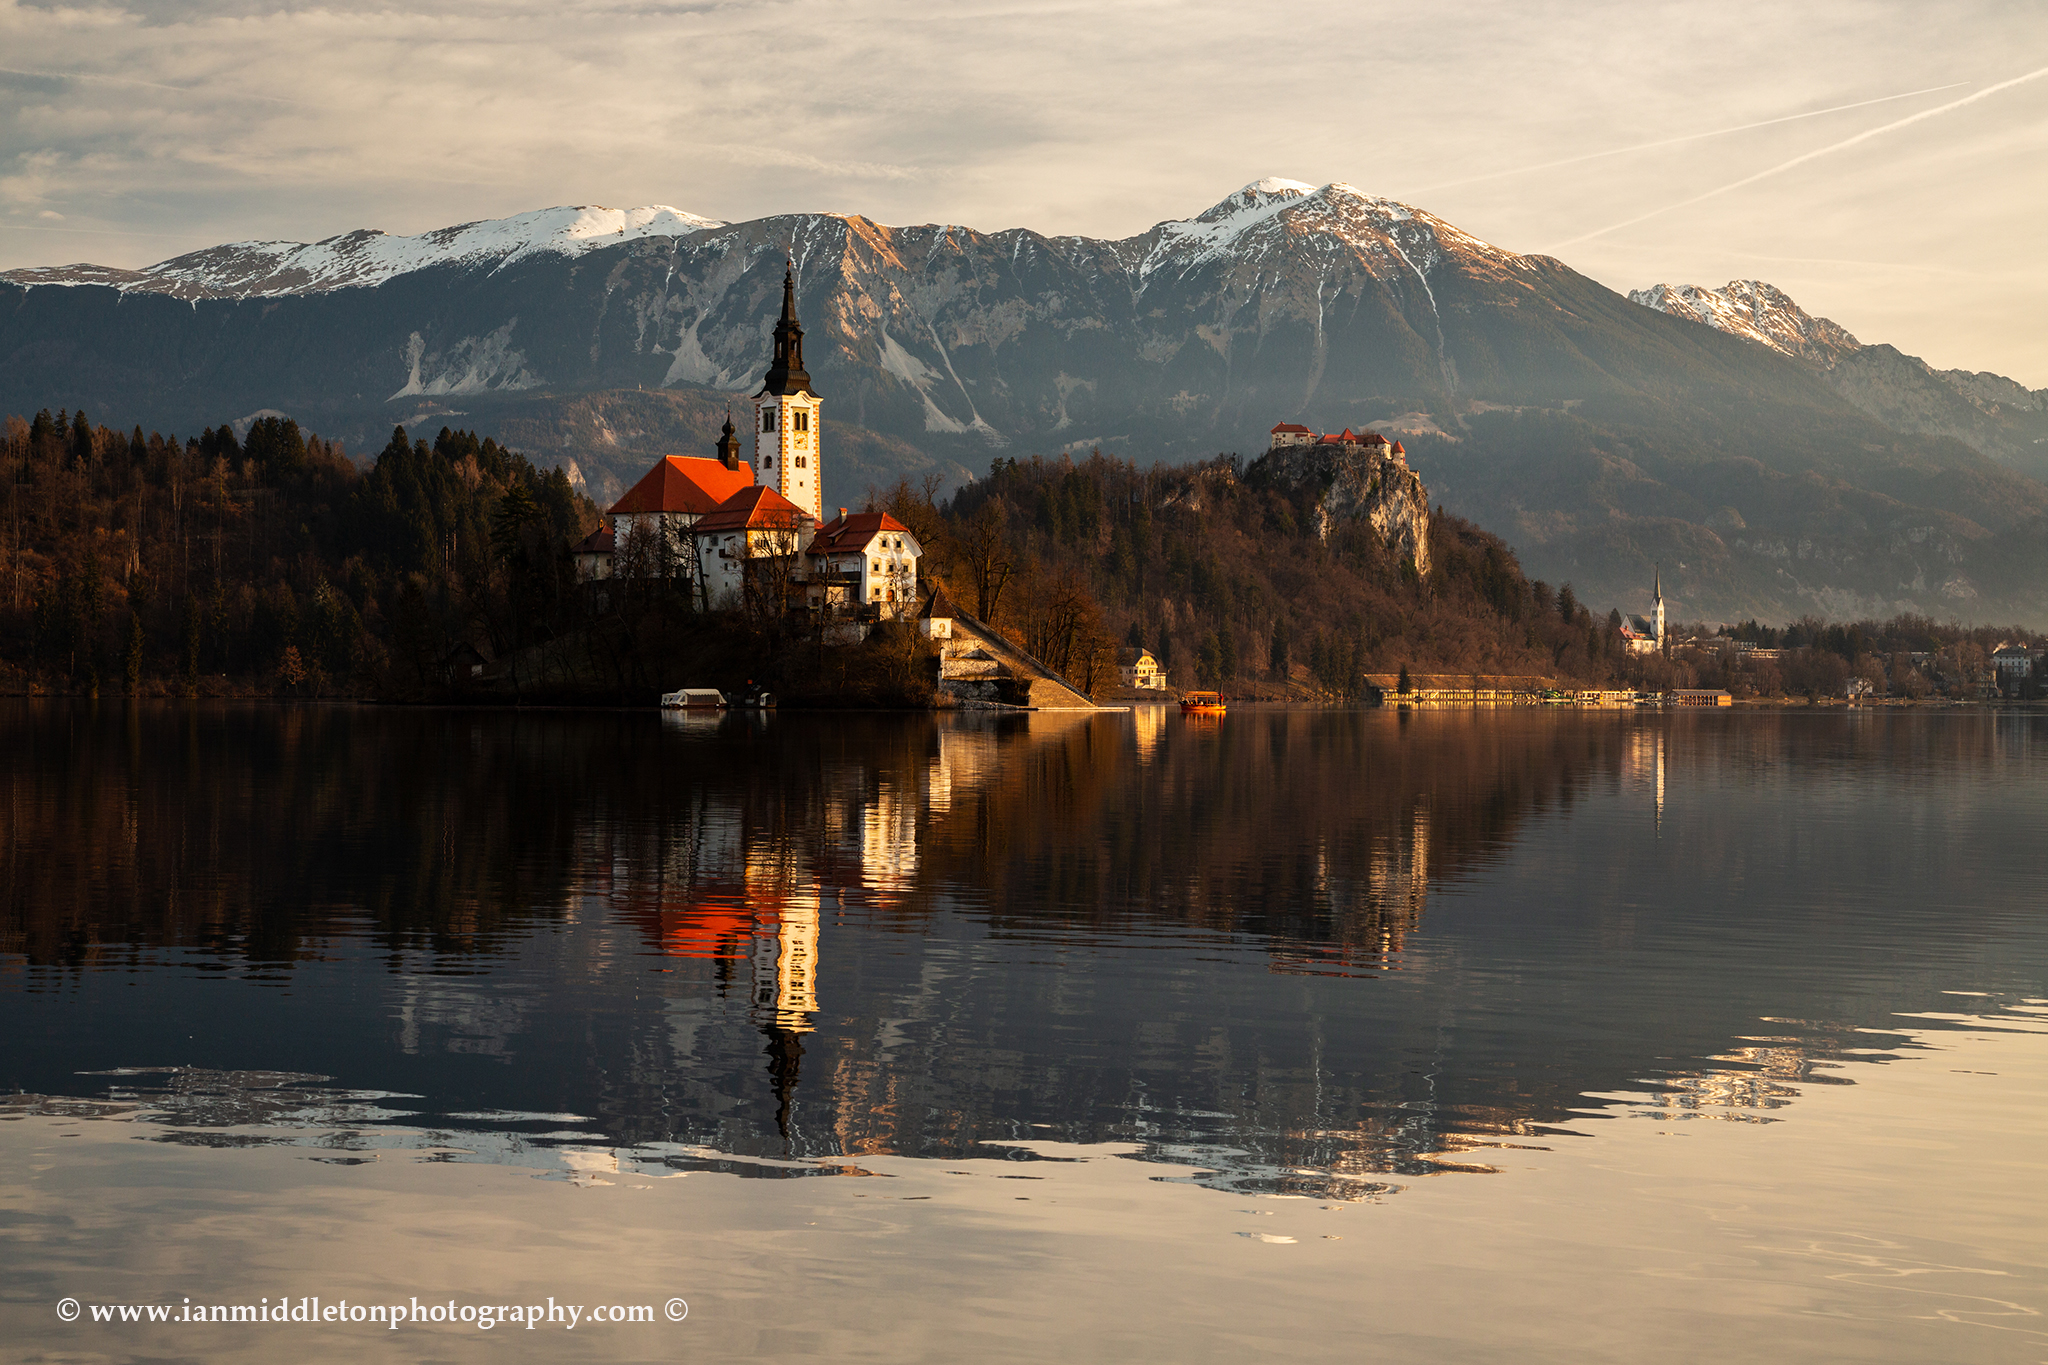 Morning at Lake Bled and the island church of the assumption of Mary with the Karavanke mountains in the background, Slovenia.